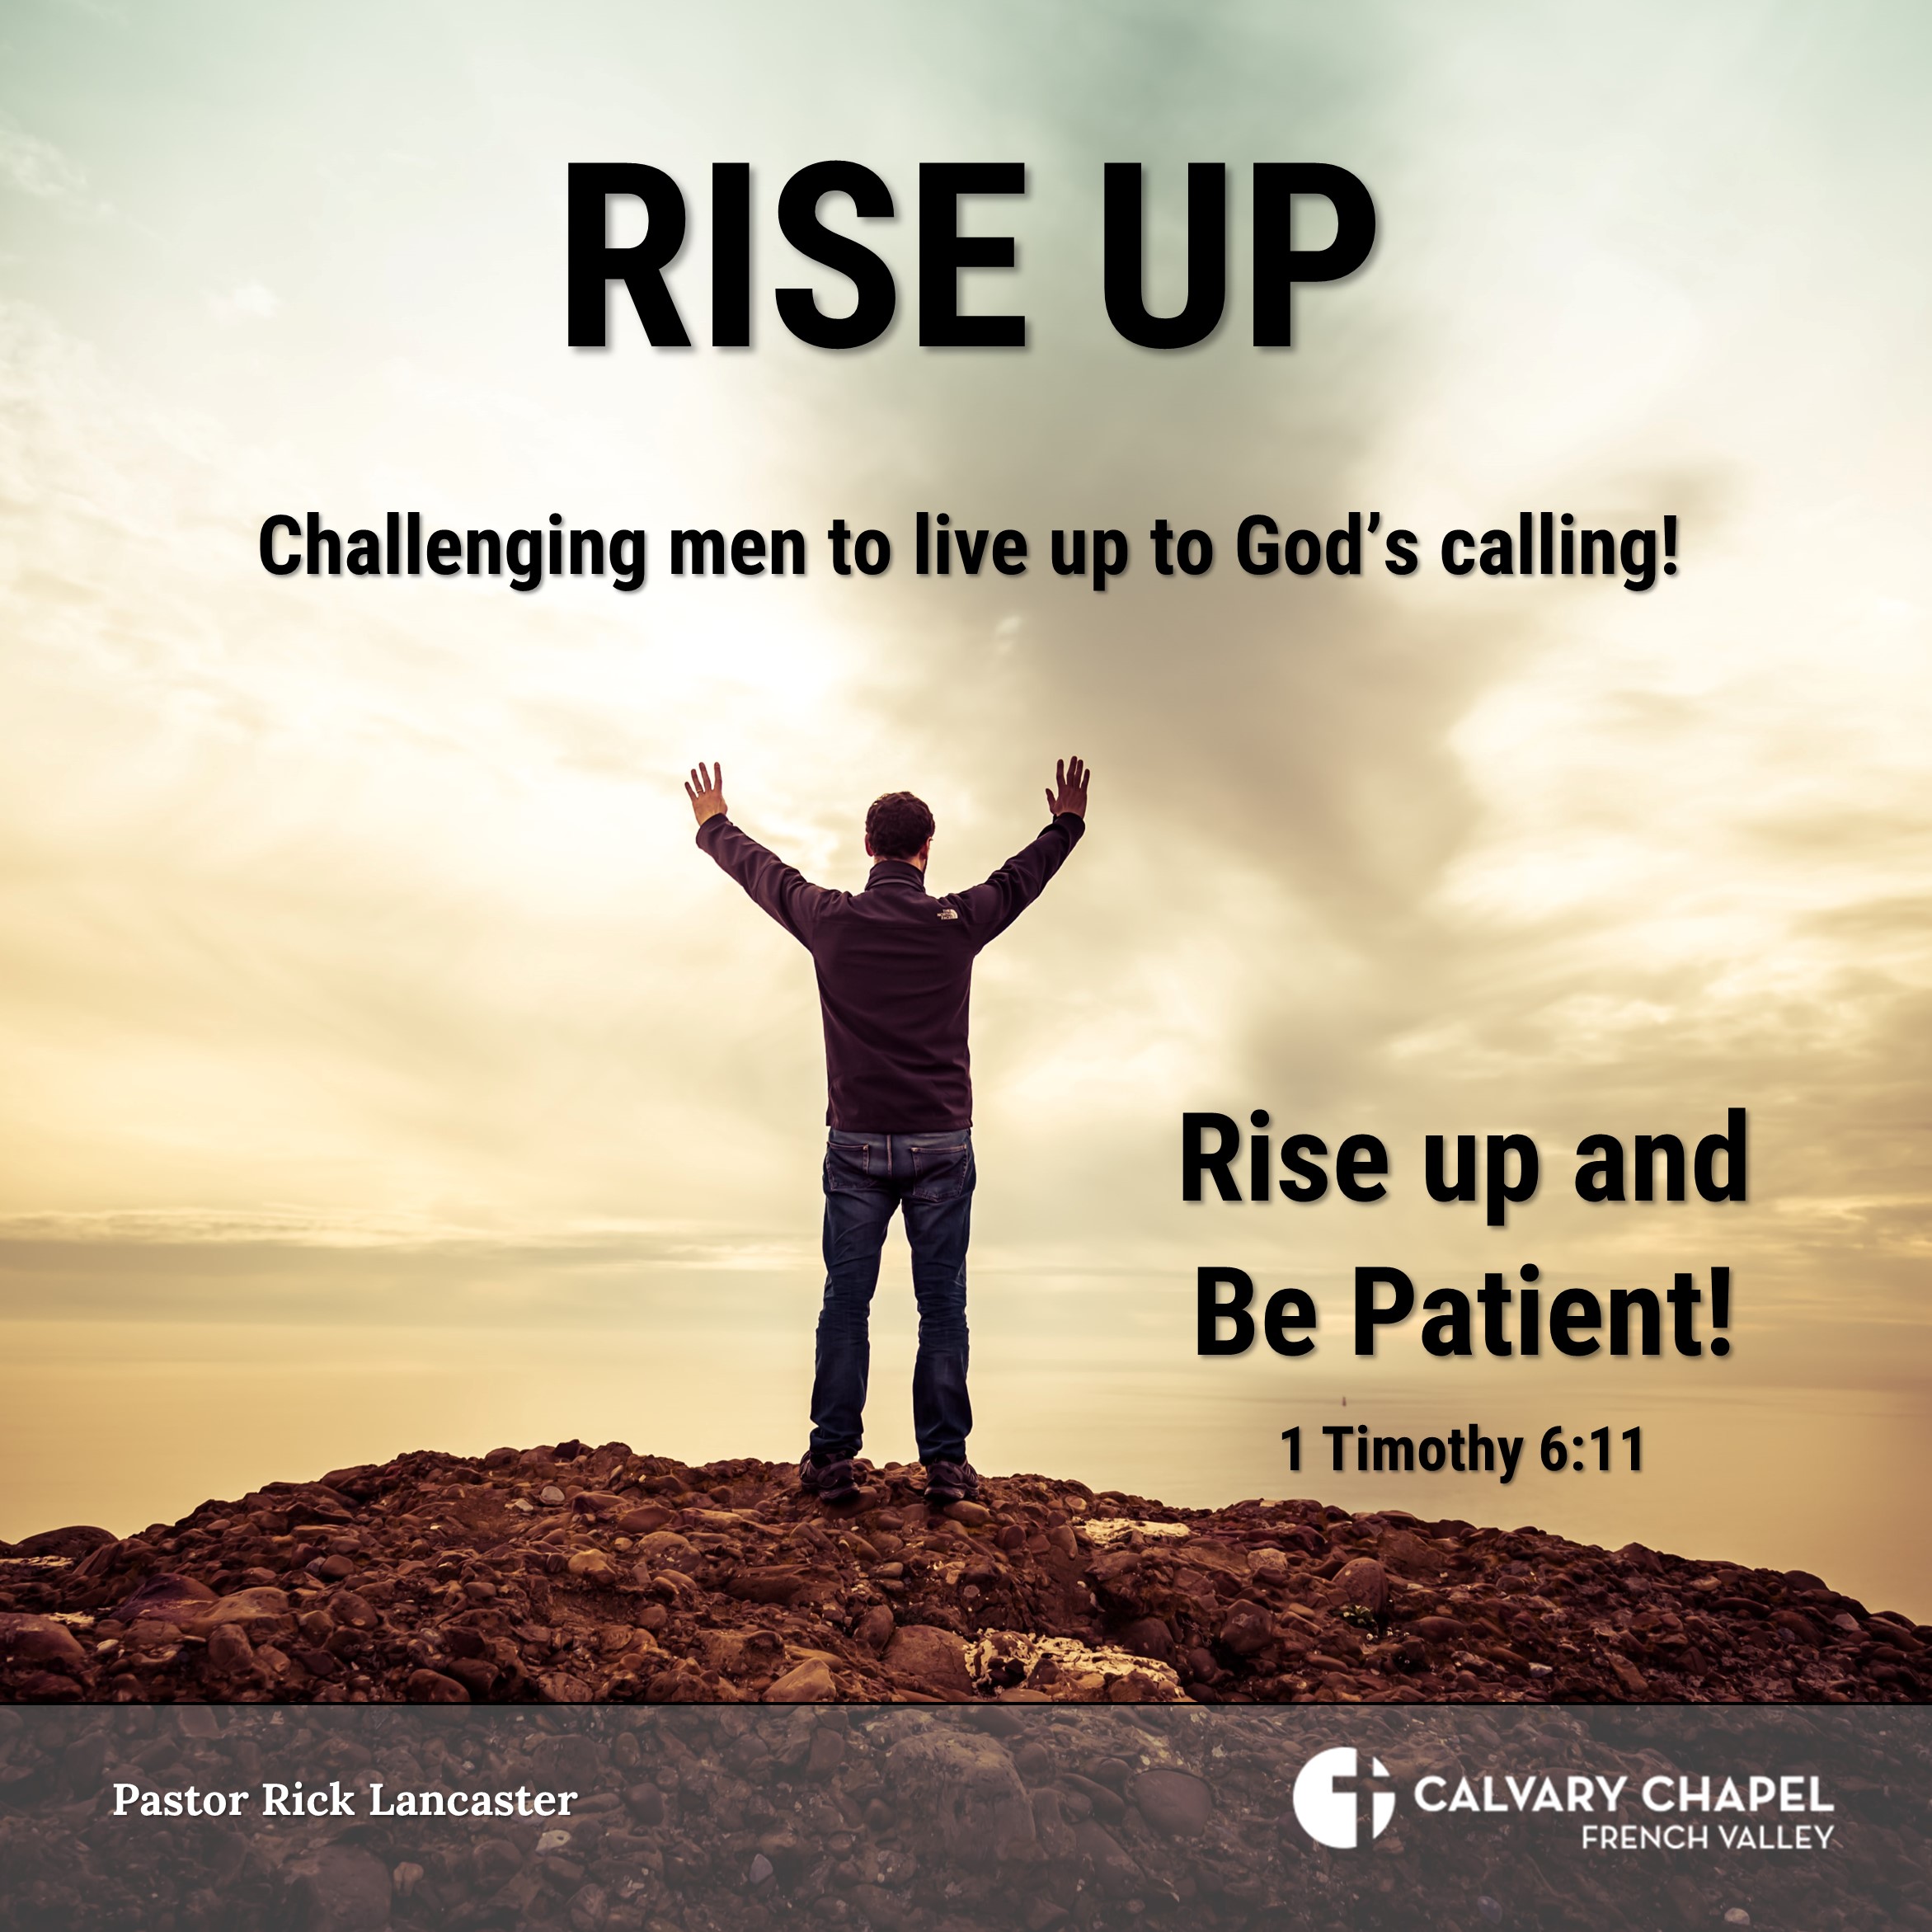 Rise up and be patient! 1 Timothy 6:11 - Men’s Breakfast - October 21, 2023 - RISE UP: Challenging men to live up to God’s calling!